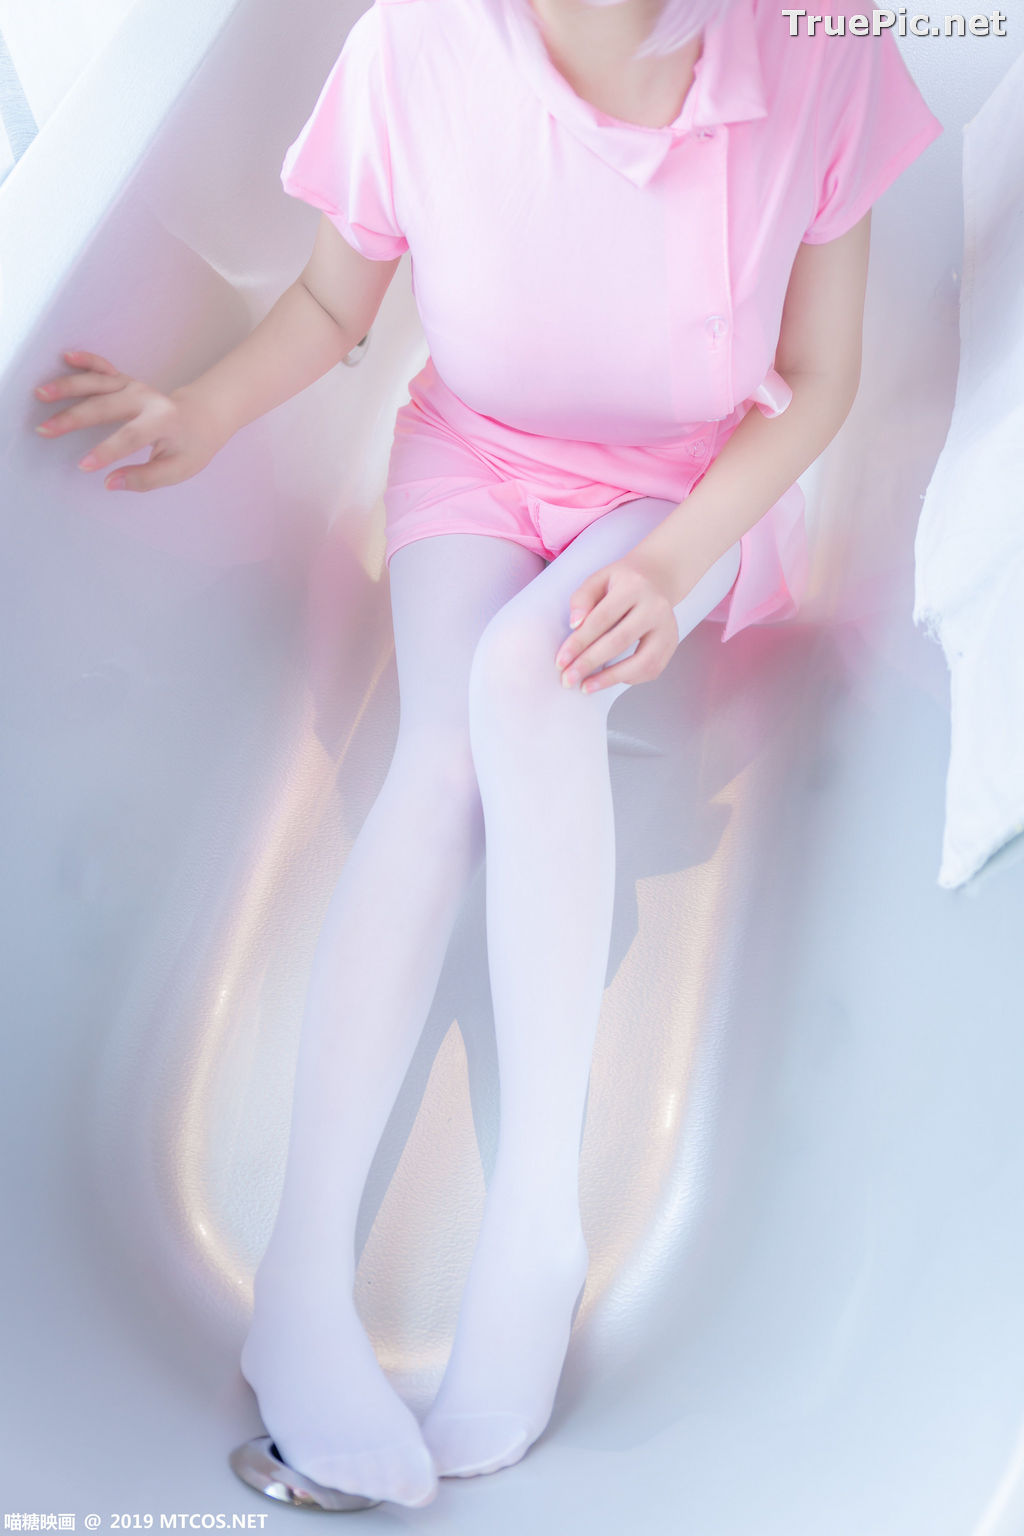 Image [MTCos] 喵糖映画 Vol.033 – Chinese Cute Model - Pink Nurse Cosplay - TruePic.net - Picture-44